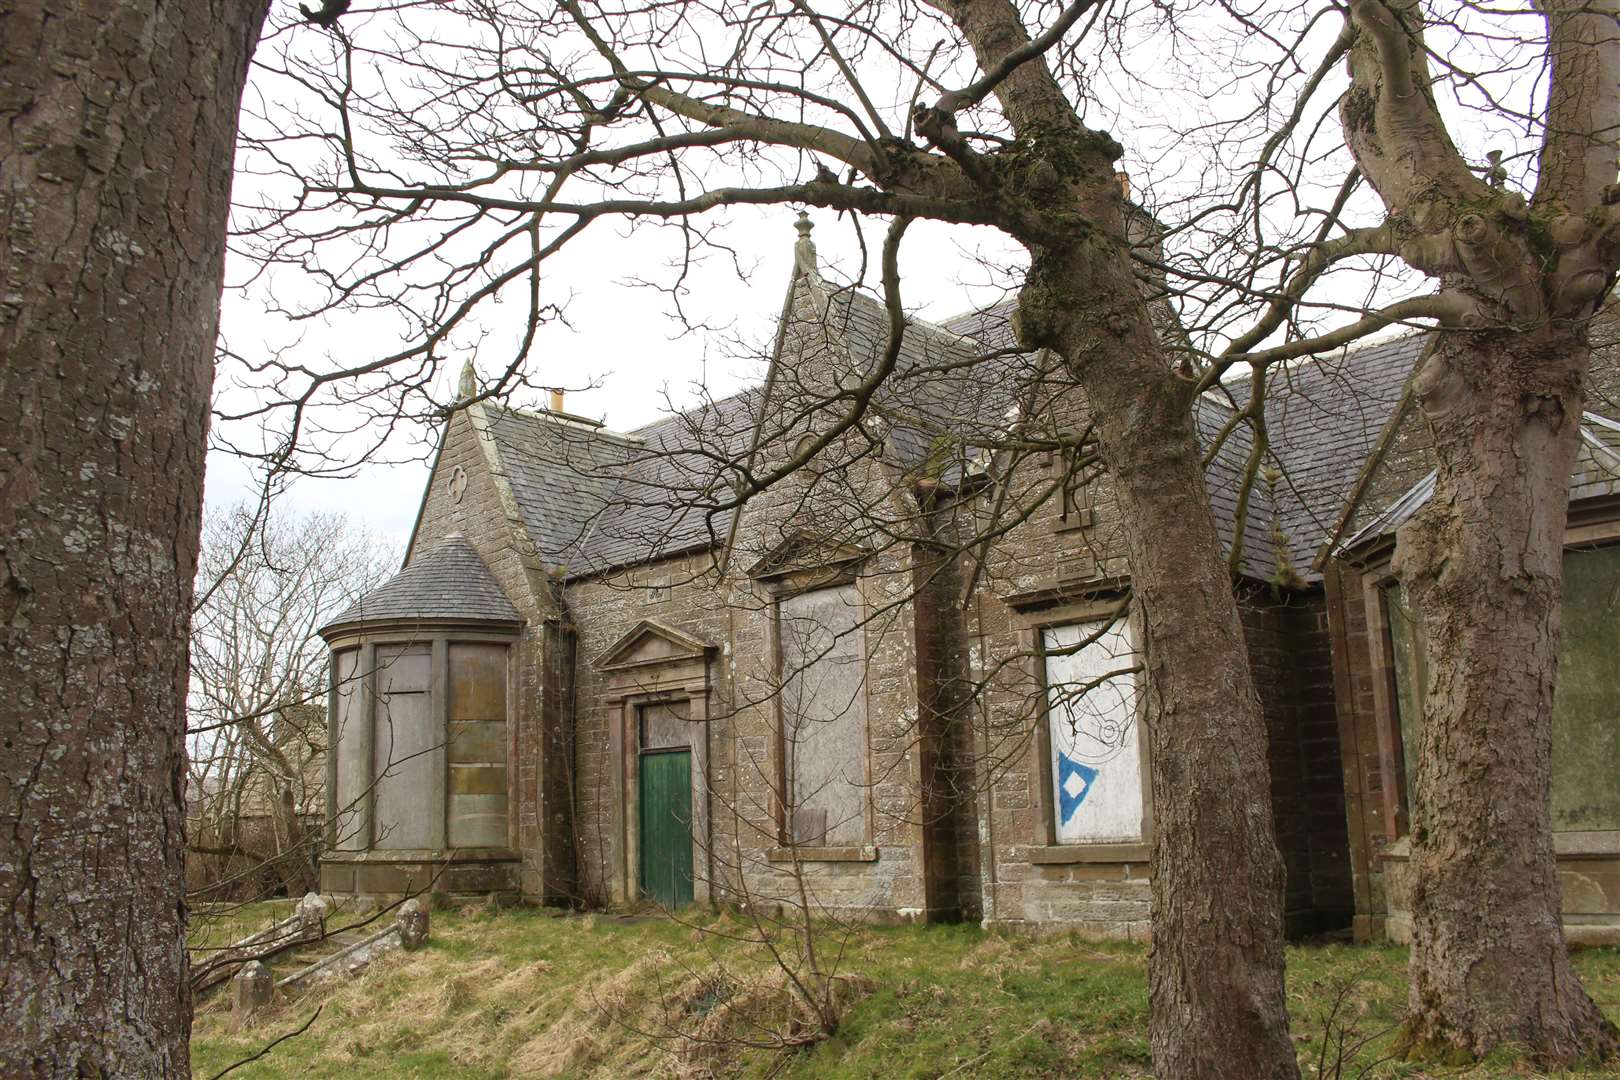 Interest has been expressed in buying the 19th century Traill Hall in Castletown